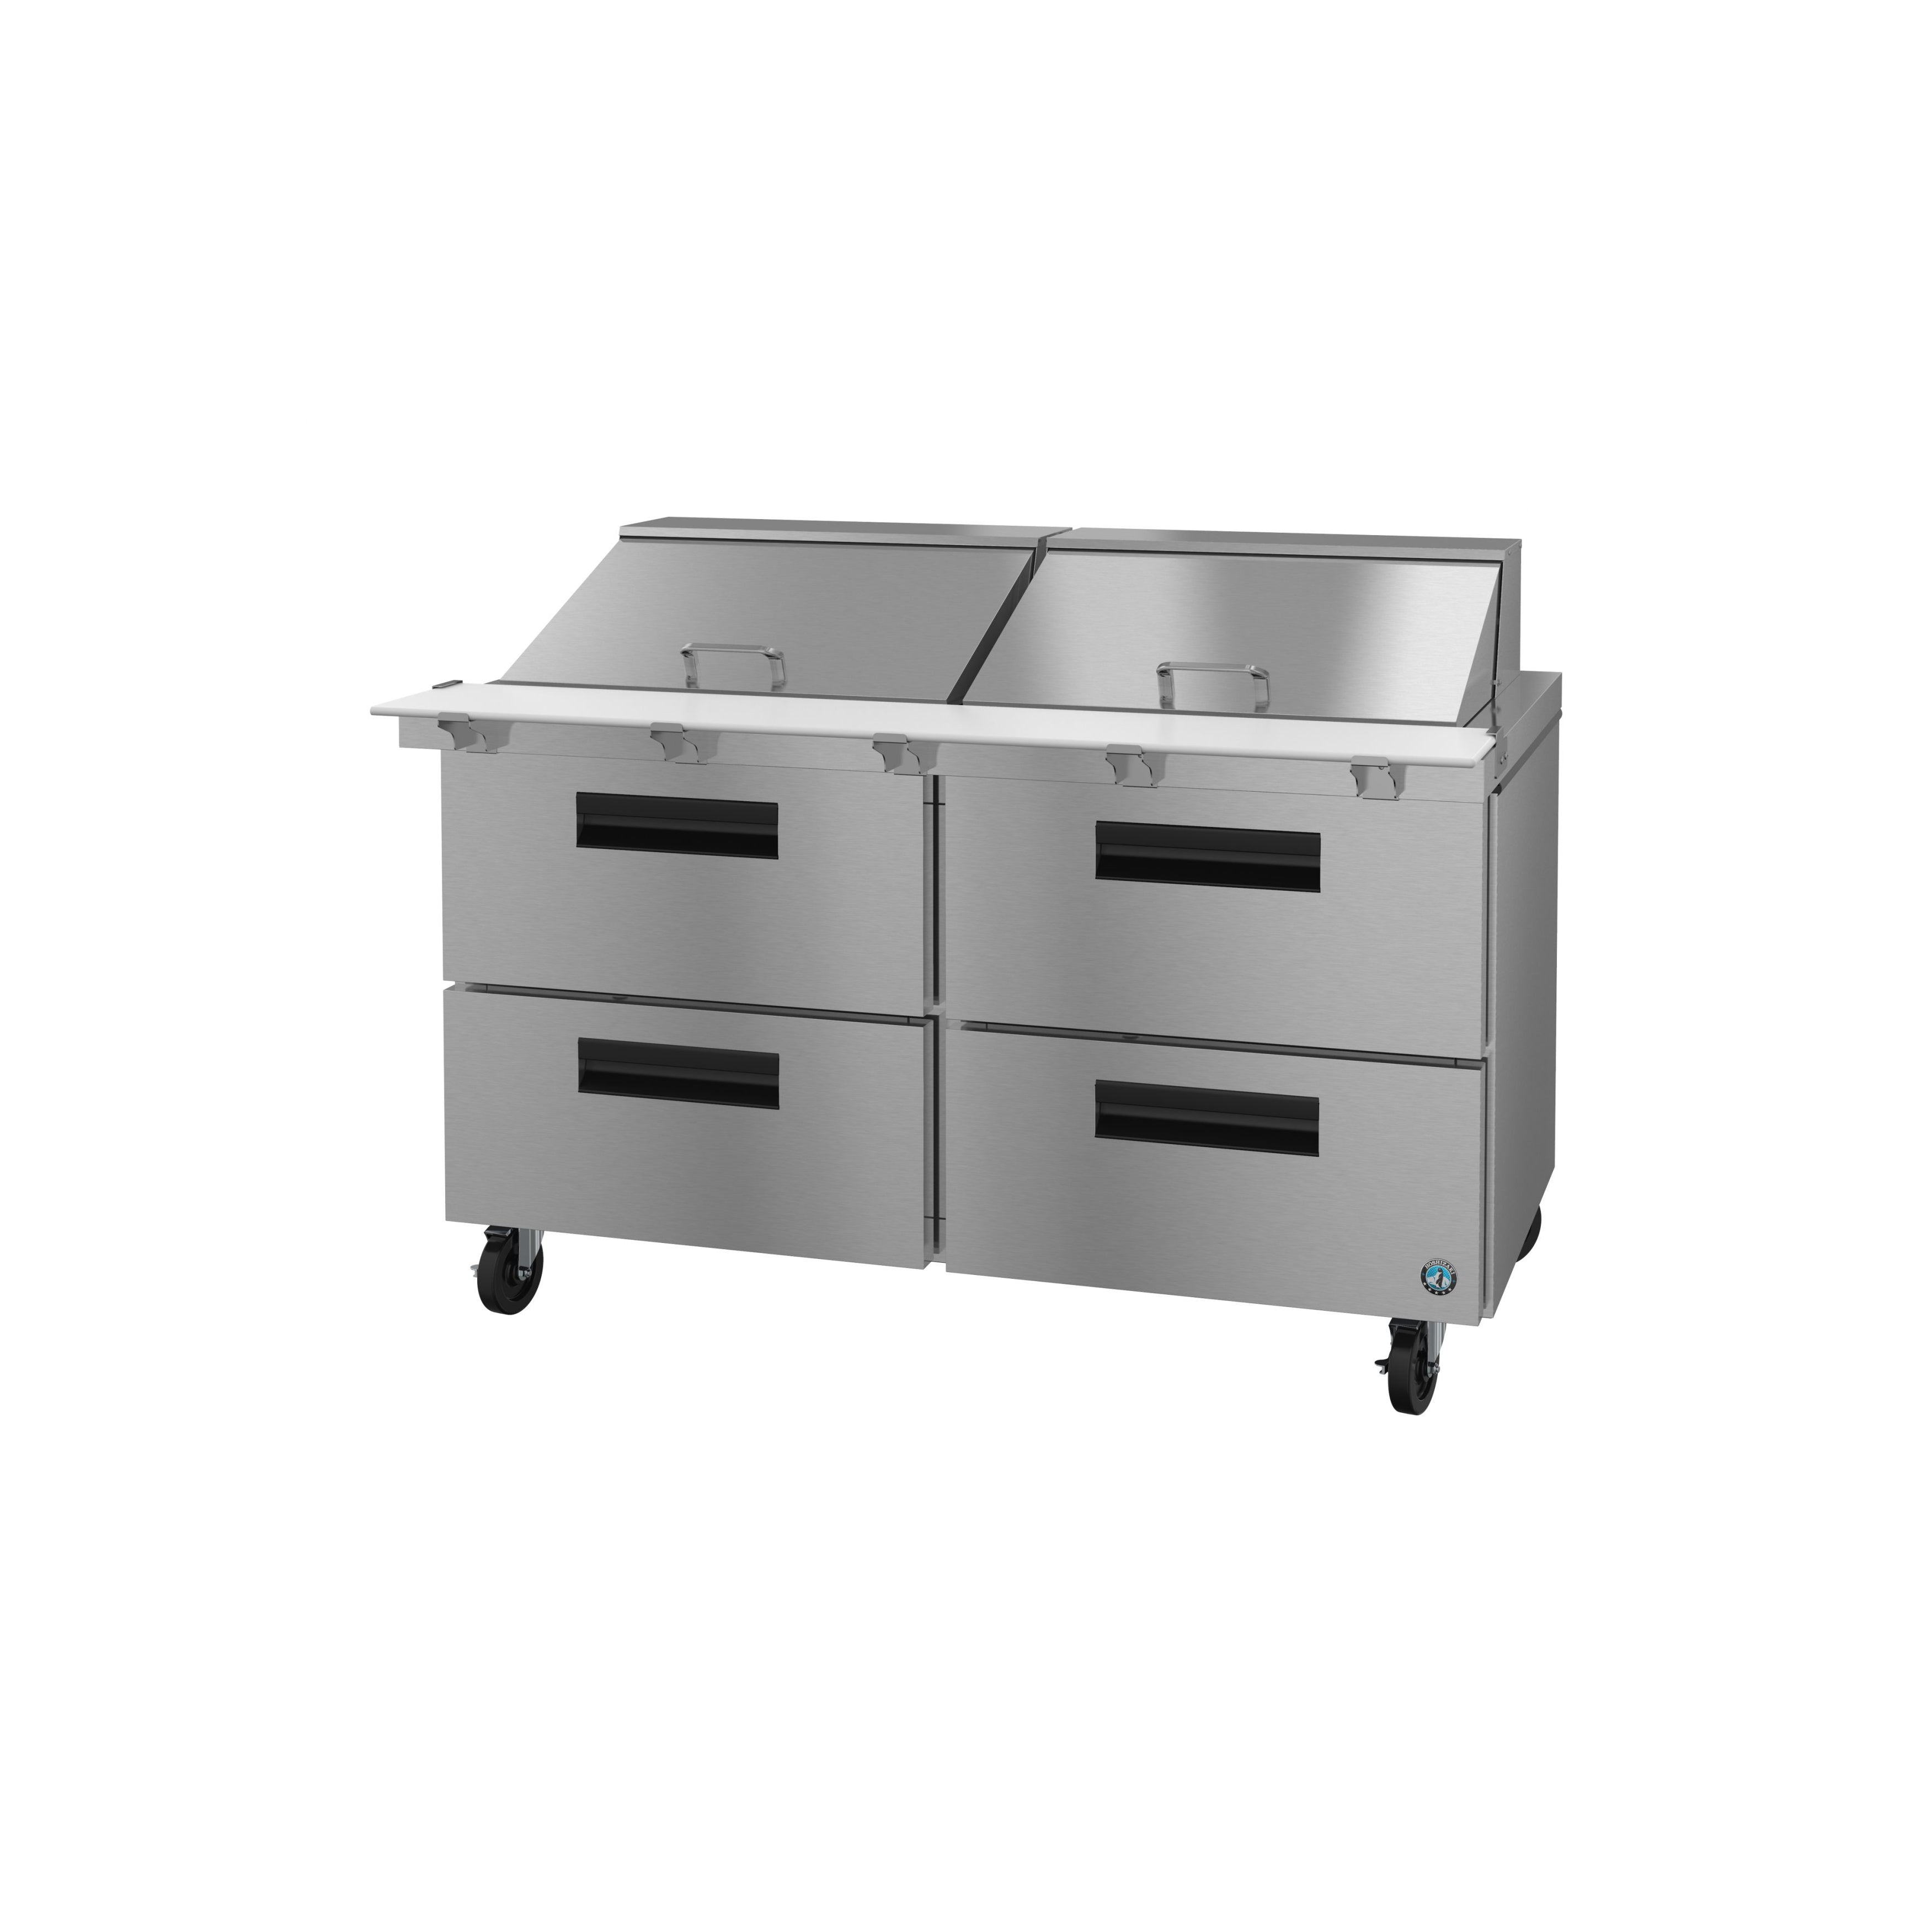 Hoshizaki - SR60B-24MD4, Commercial 60" Two Section Mega Top Prep Table, Refrigerator Stainless Drawers 14.8cu.ft.